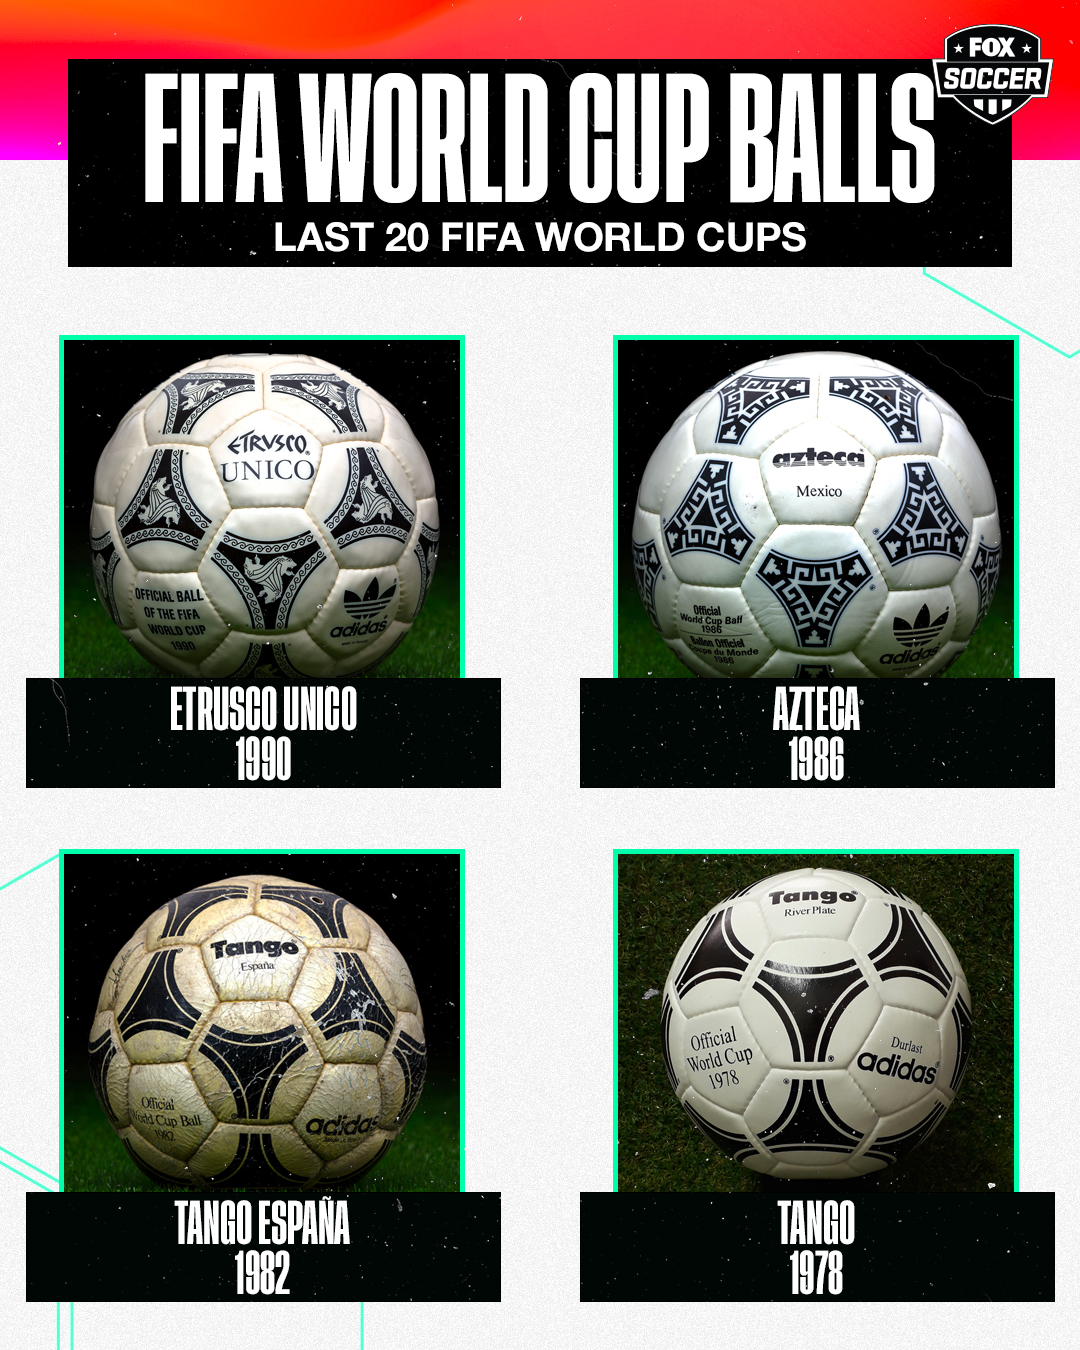 FOX Soccer on X: Here are the FIFA World Cup Final balls since